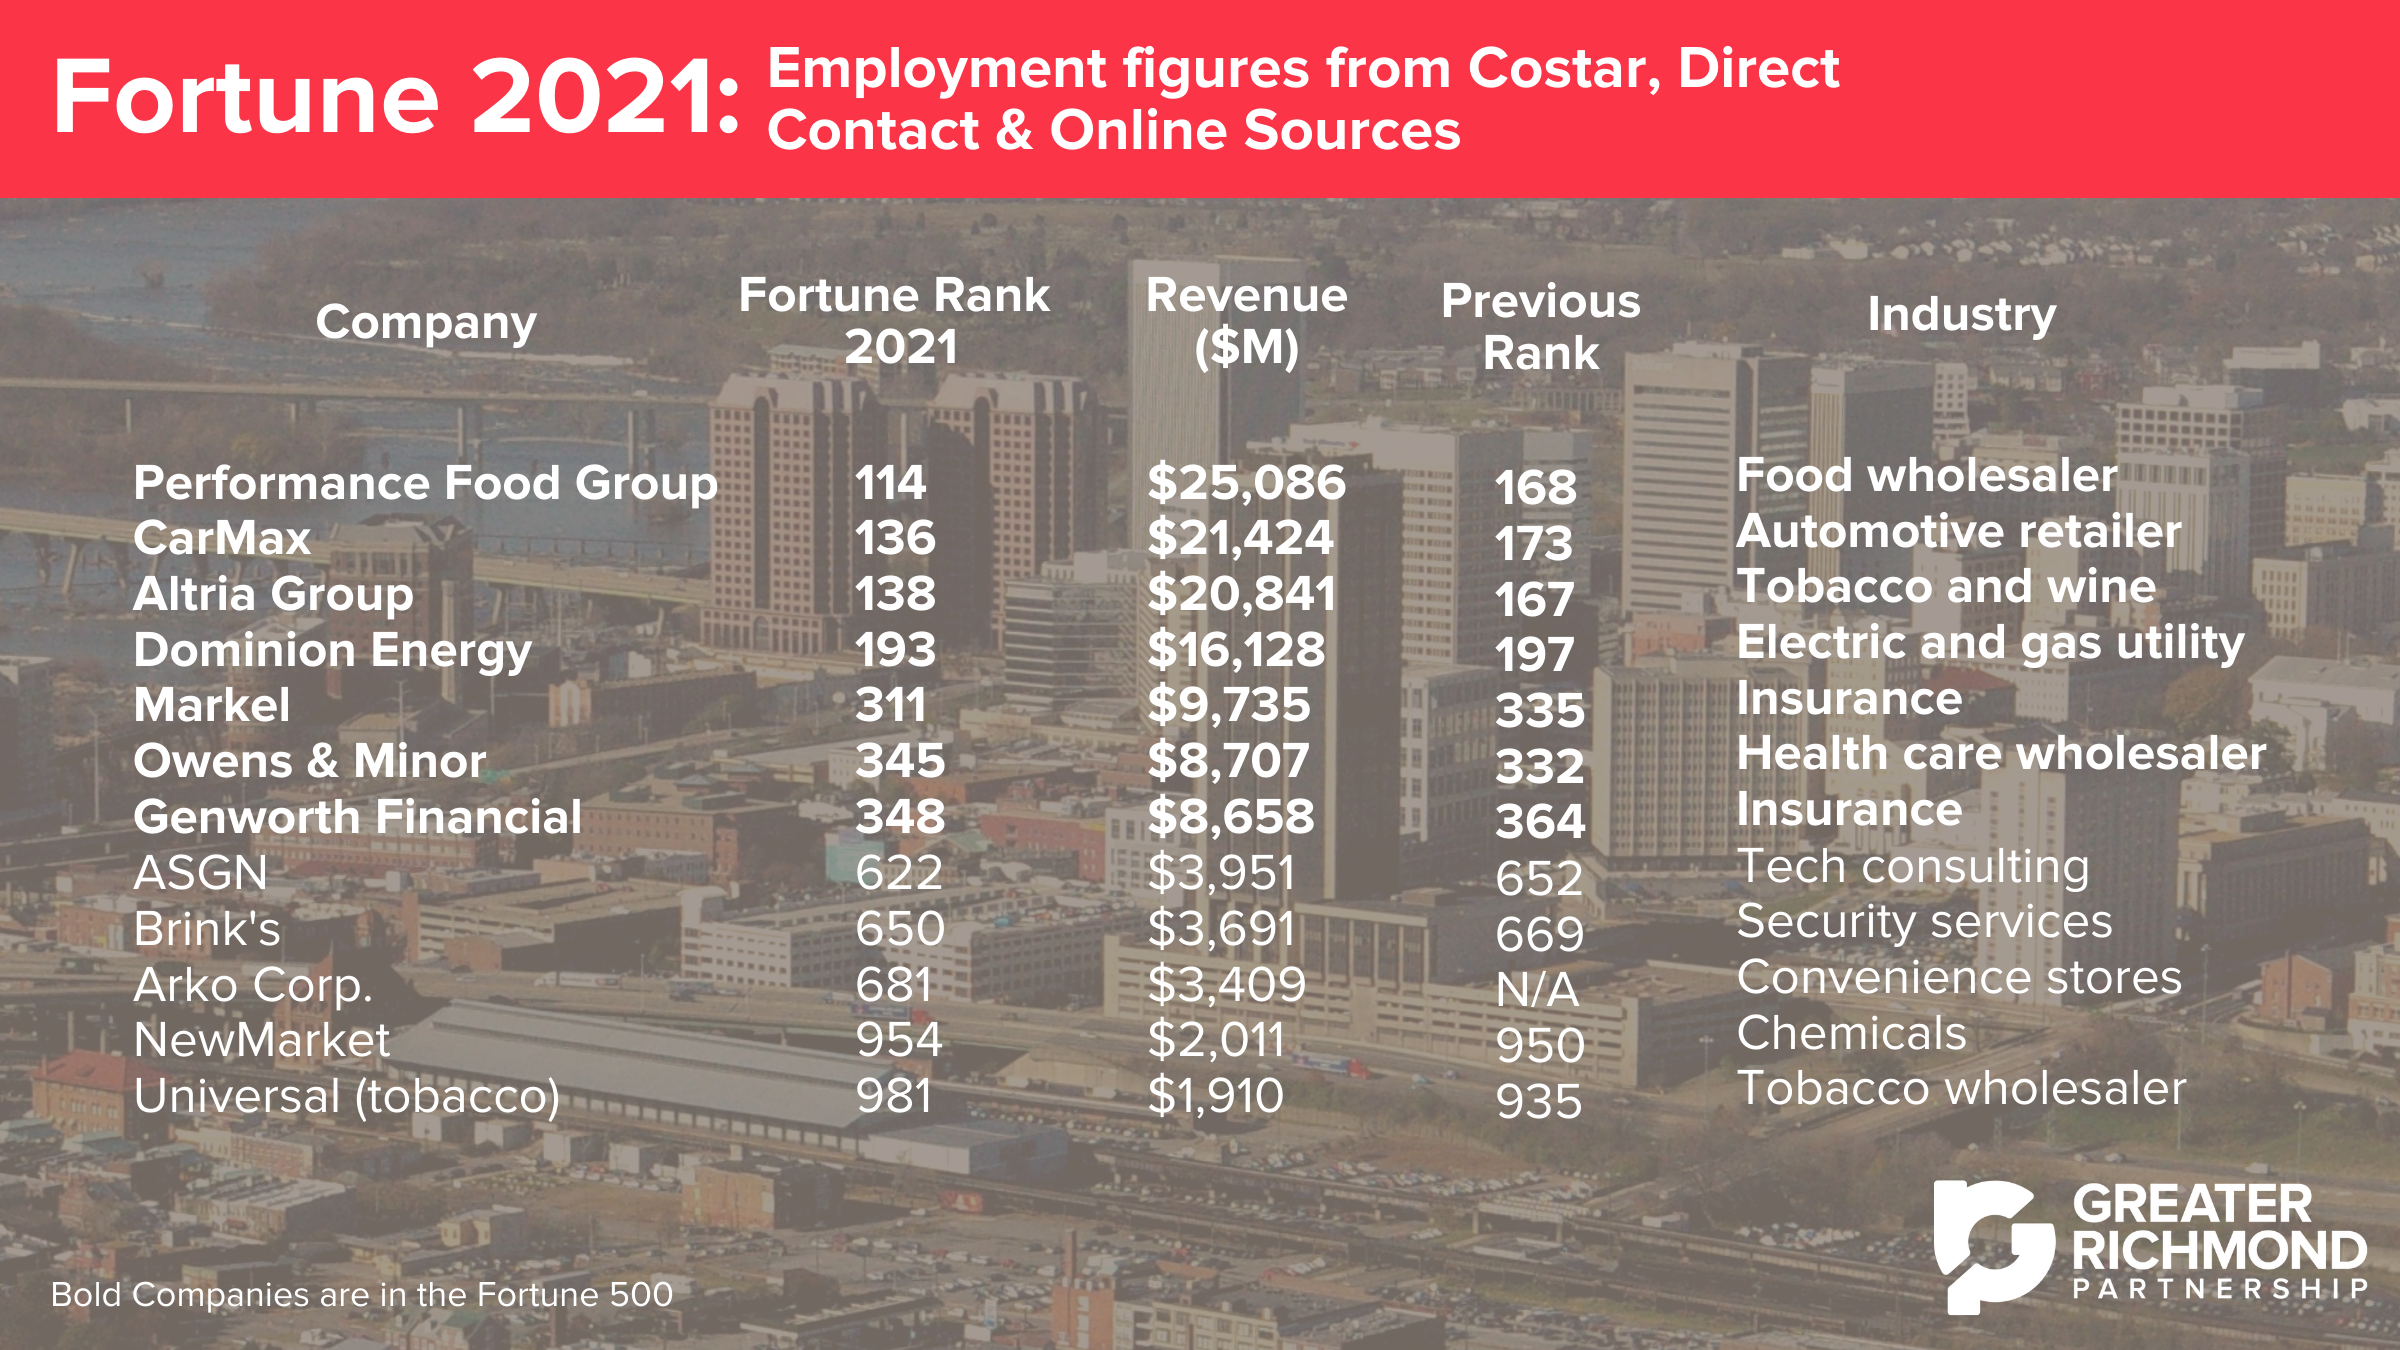 Graphic lists 12 Fortune 1000 companies in Greater Richmond along with their ranks, previous ranks, revenues and industries.